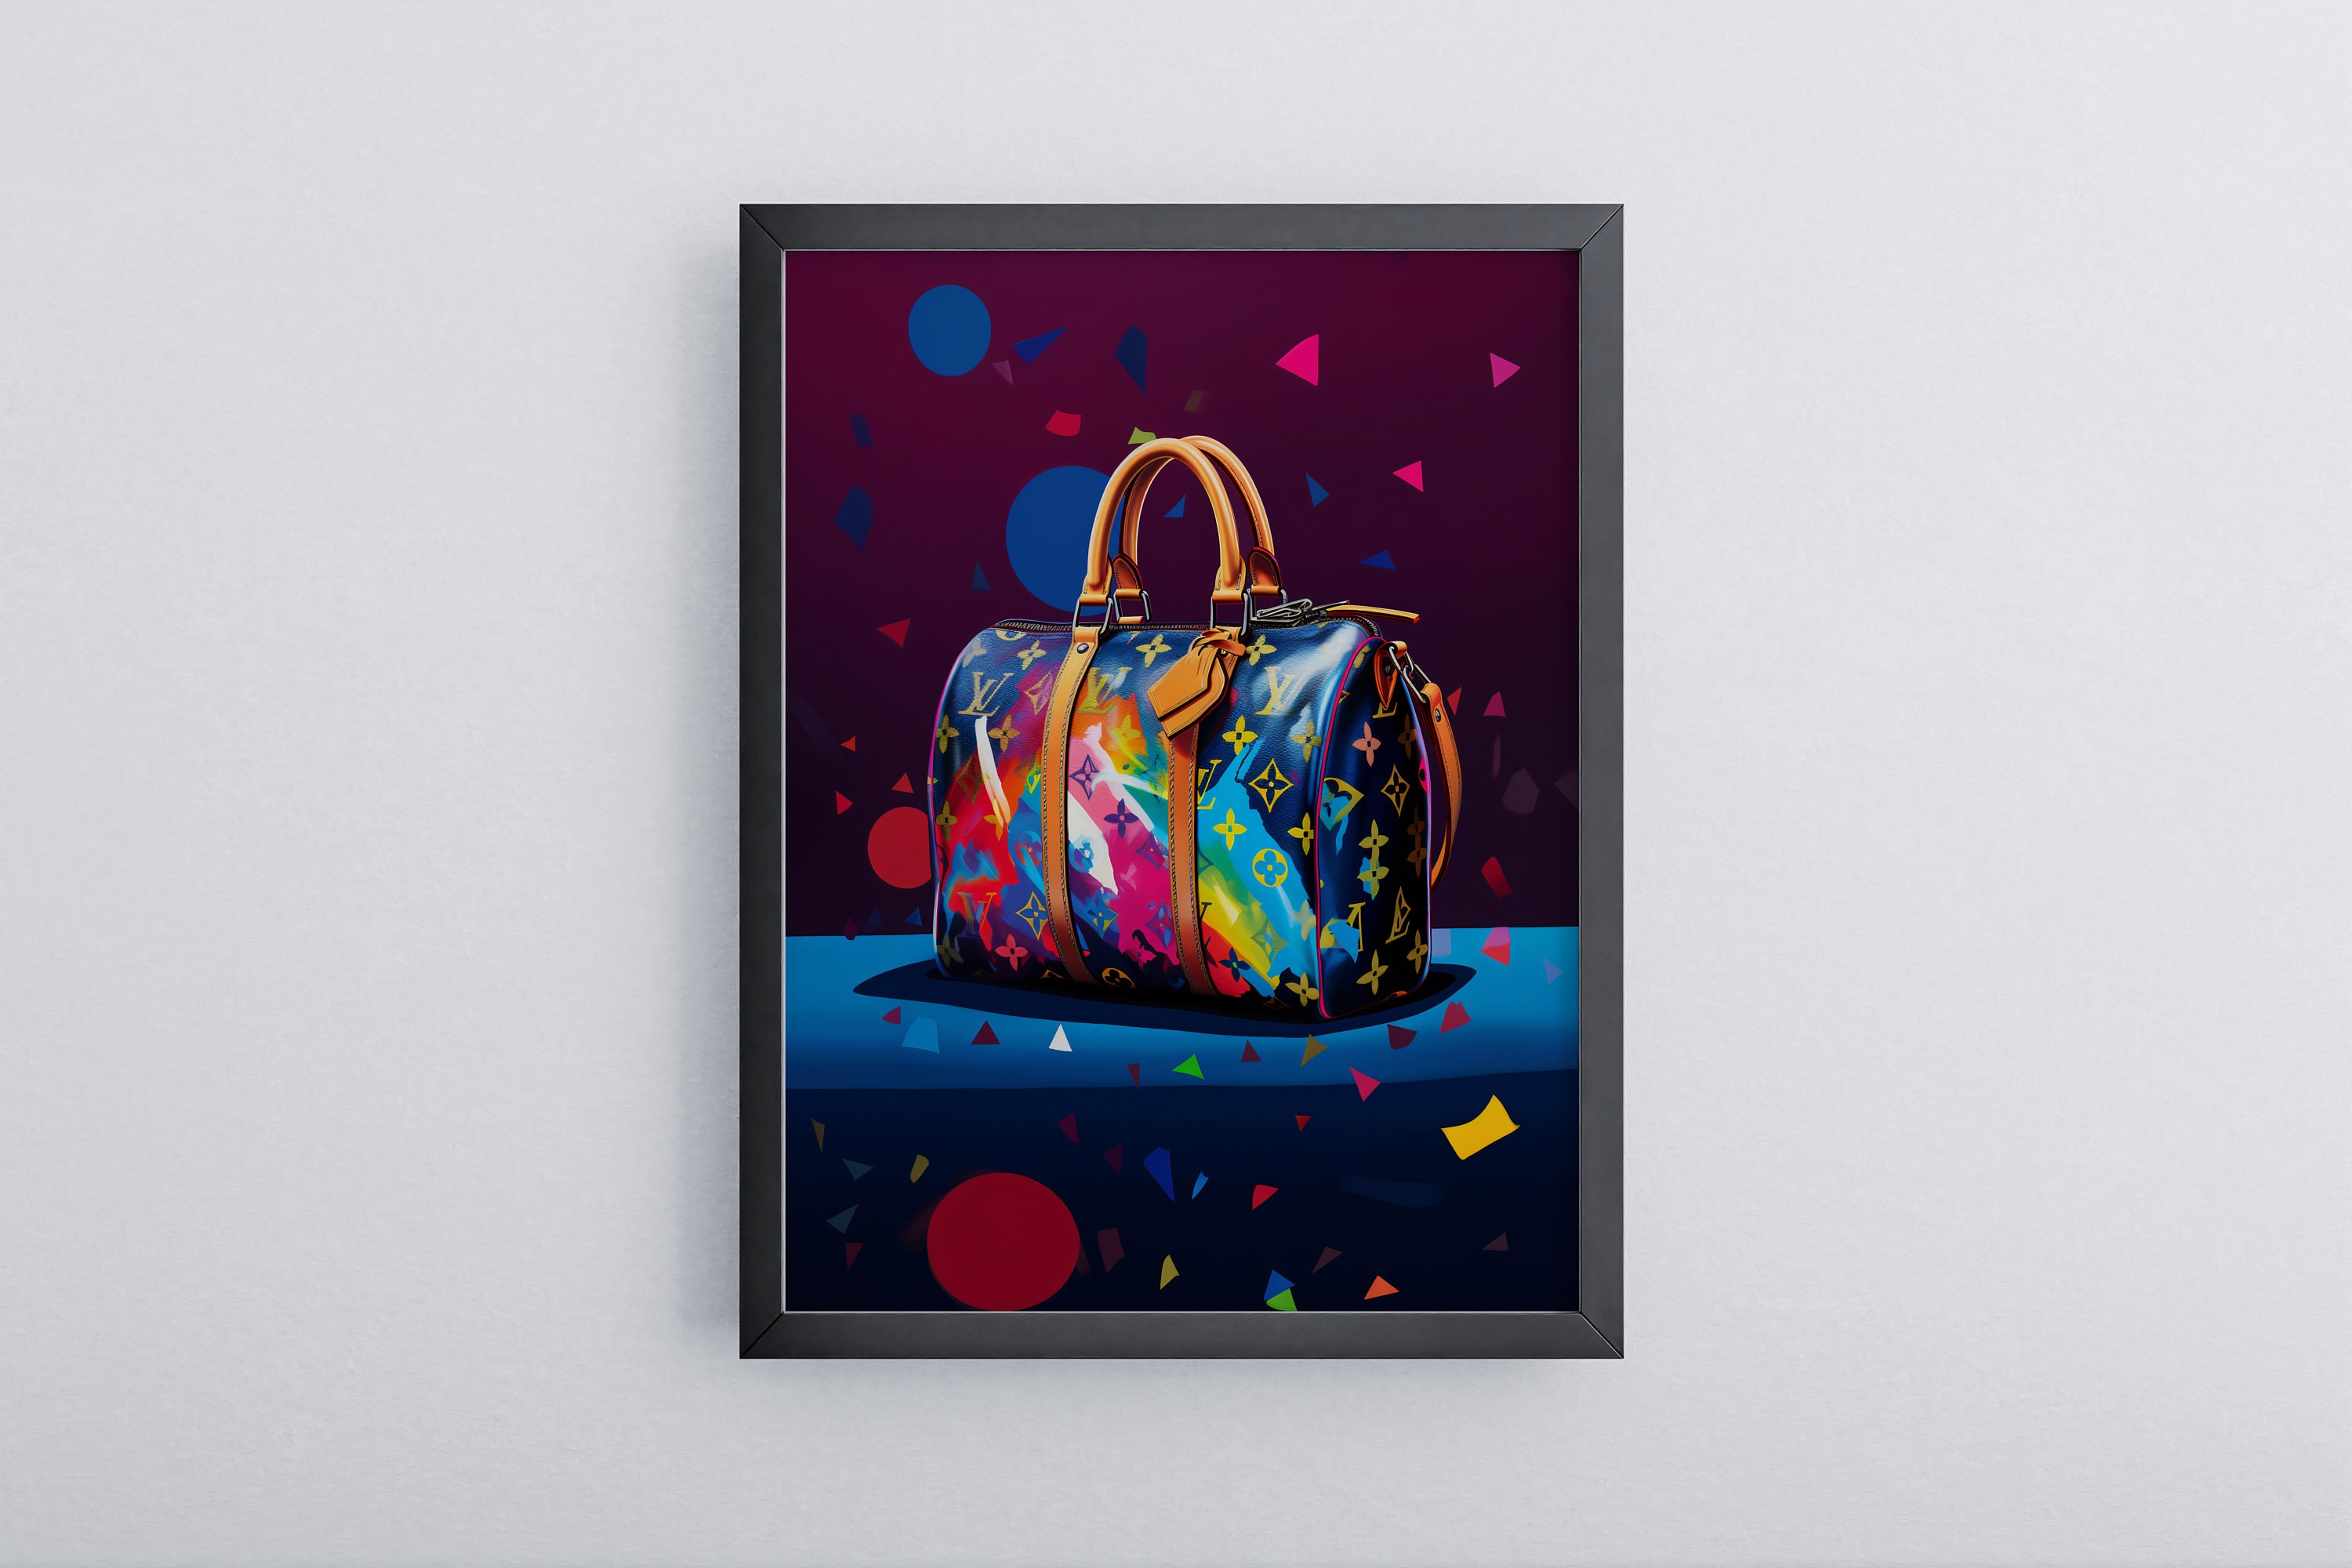 Buy Louis Vuitton Wall Art Online In India -  India